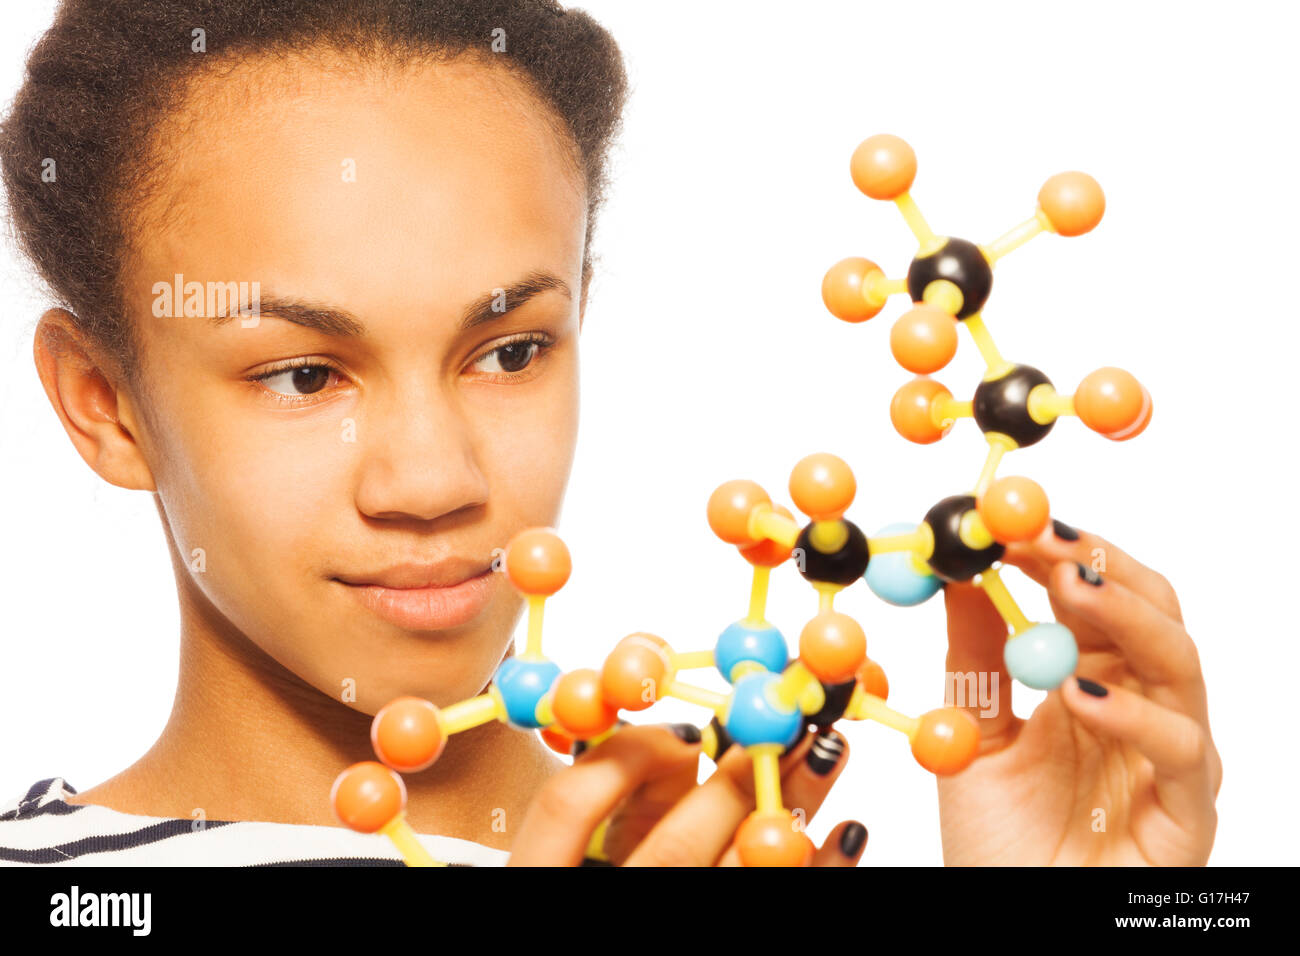 Close-up photo of African girl and molecular model Stock Photo